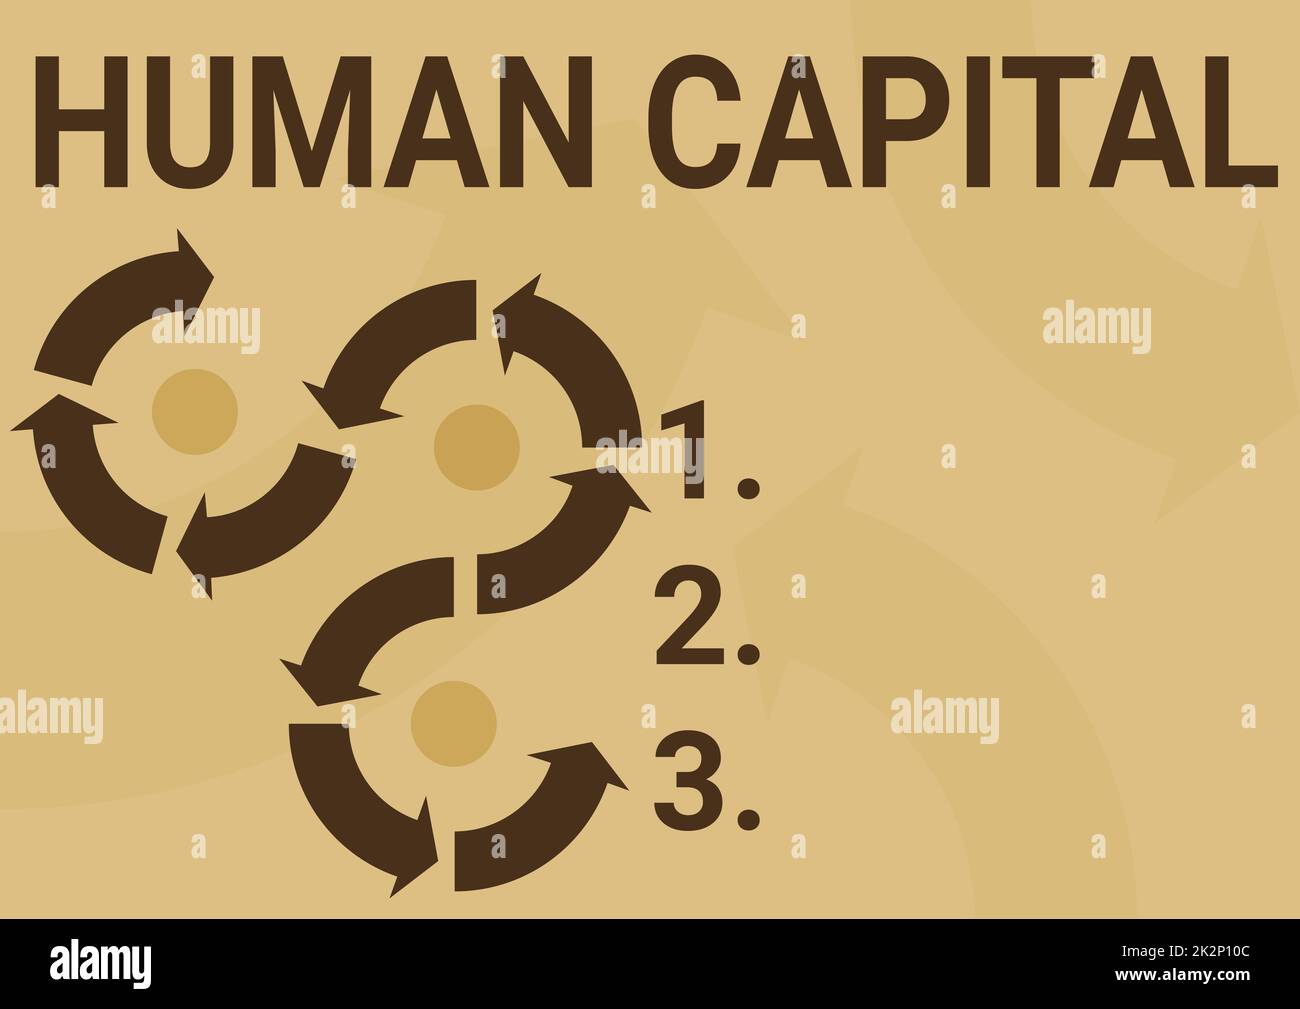 Text showing inspiration Human Capital. Concept meaning Intangible Collective Resources Competence Capital Education Arrow sign symbolizing successfully accomplishing project cycles. Stock Photo